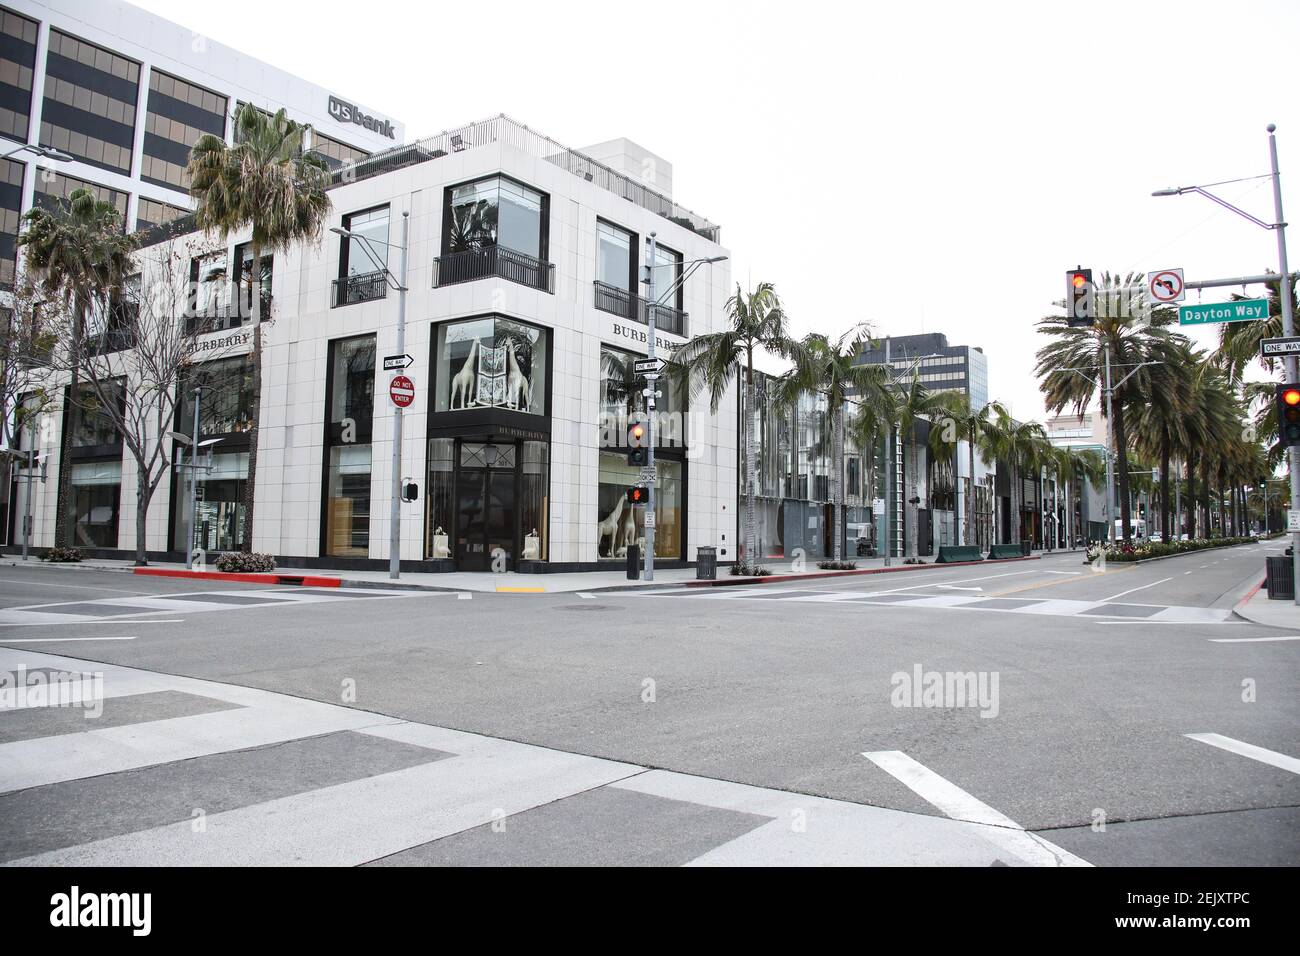 BEVERLY HILLS, LOS ANGELES, CALIFORNIA, USA - MARCH 31: A view of Burberry  Beverly Hills Rodeo Drive store on March 31, 2020 in Beverly Hills, Los  Angeles, California, United States. Los Angeles